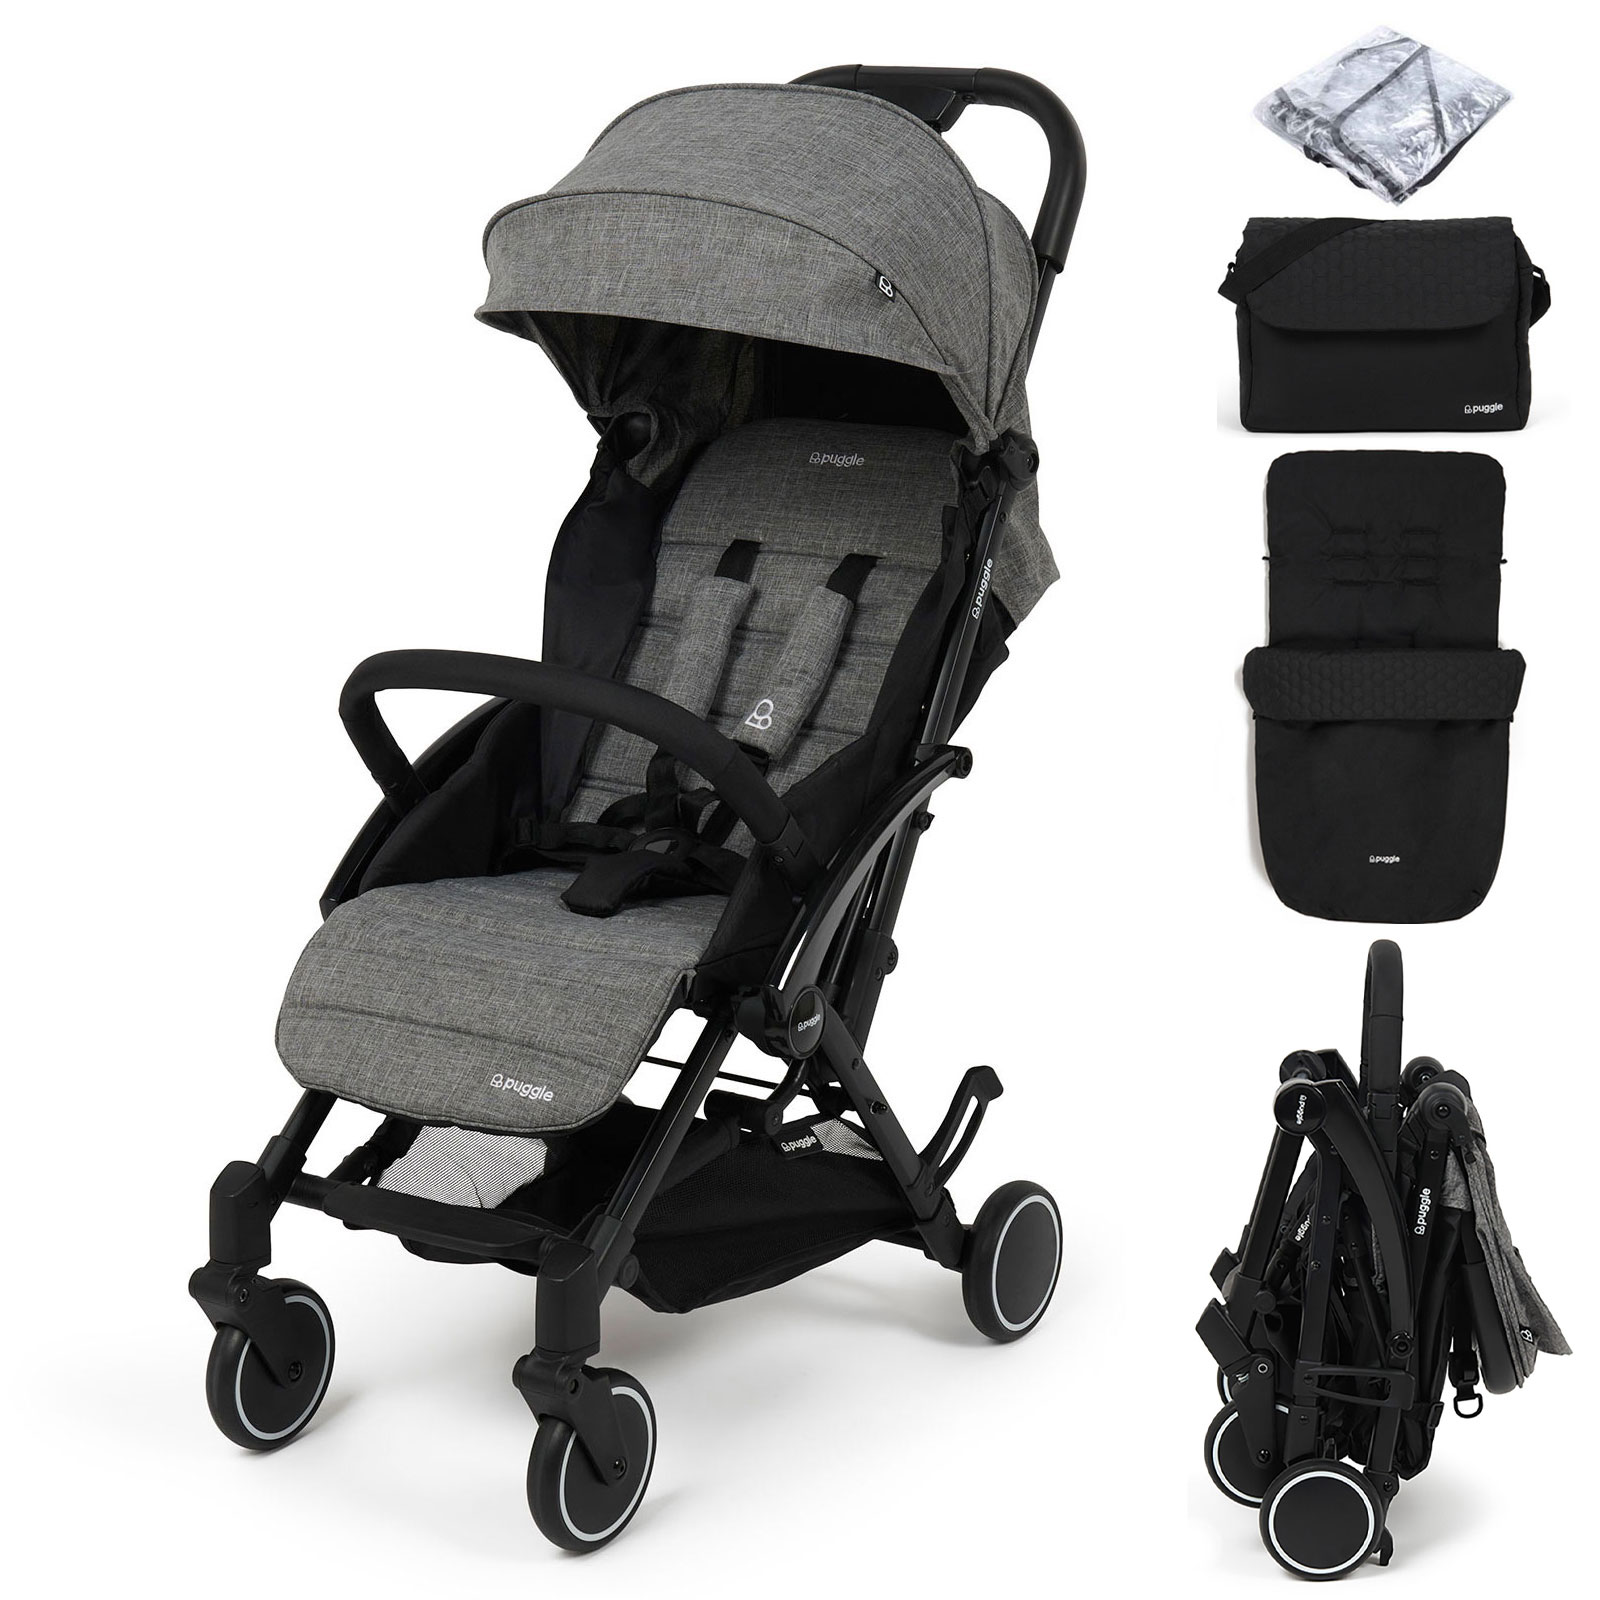 Puggle Seattle Fold & Go Compact Pushchair & Raincover With Honeycomb Footmuff & Changing Bag - Graphite Grey